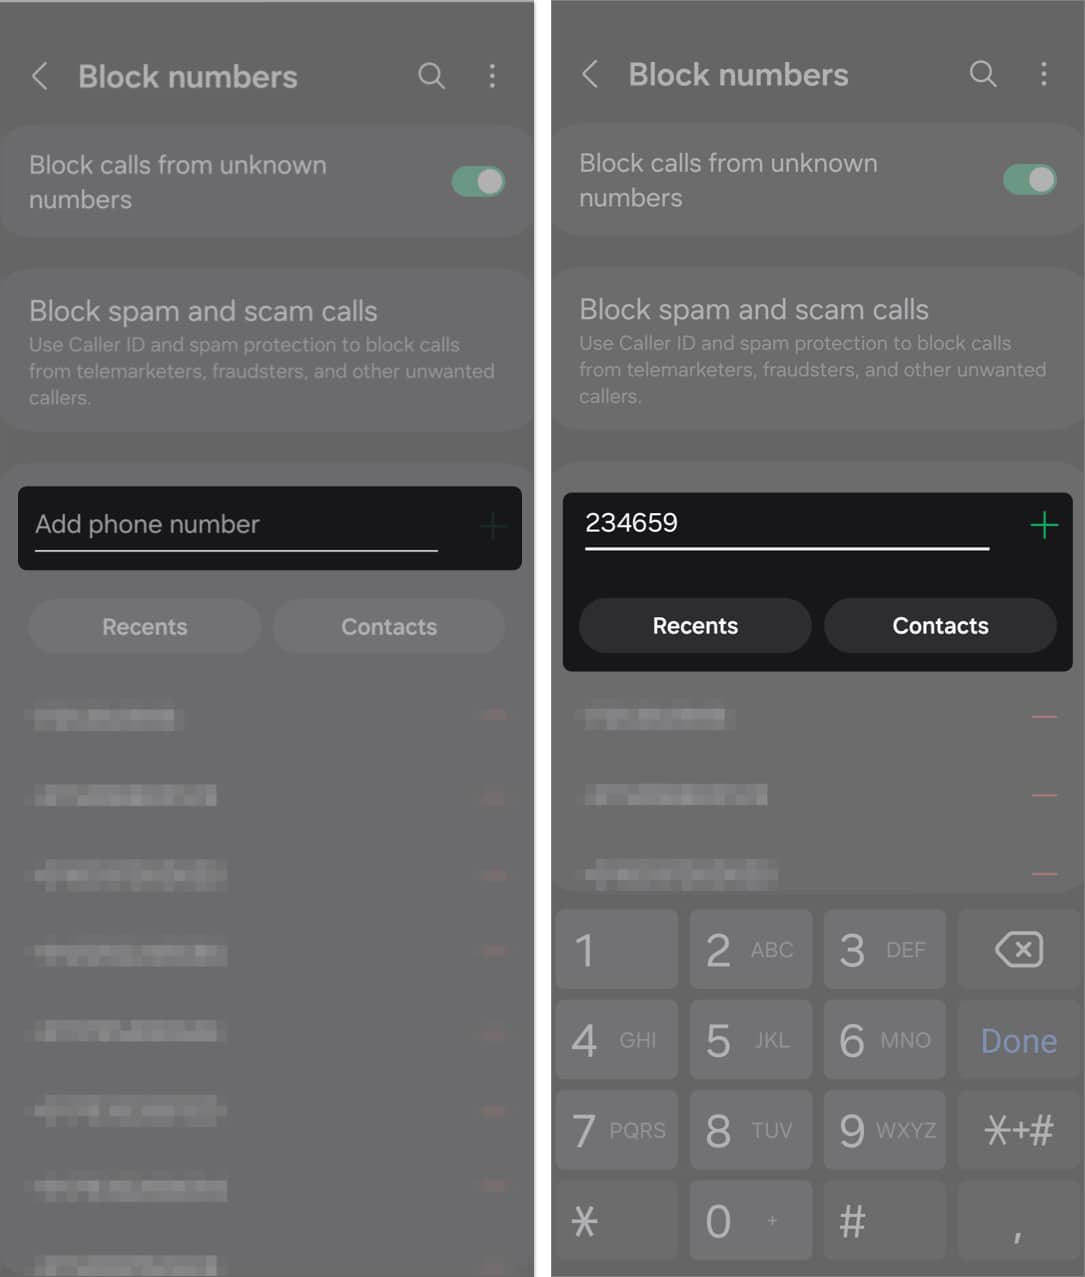 Enter the contact to block in add phone number, tap + sign